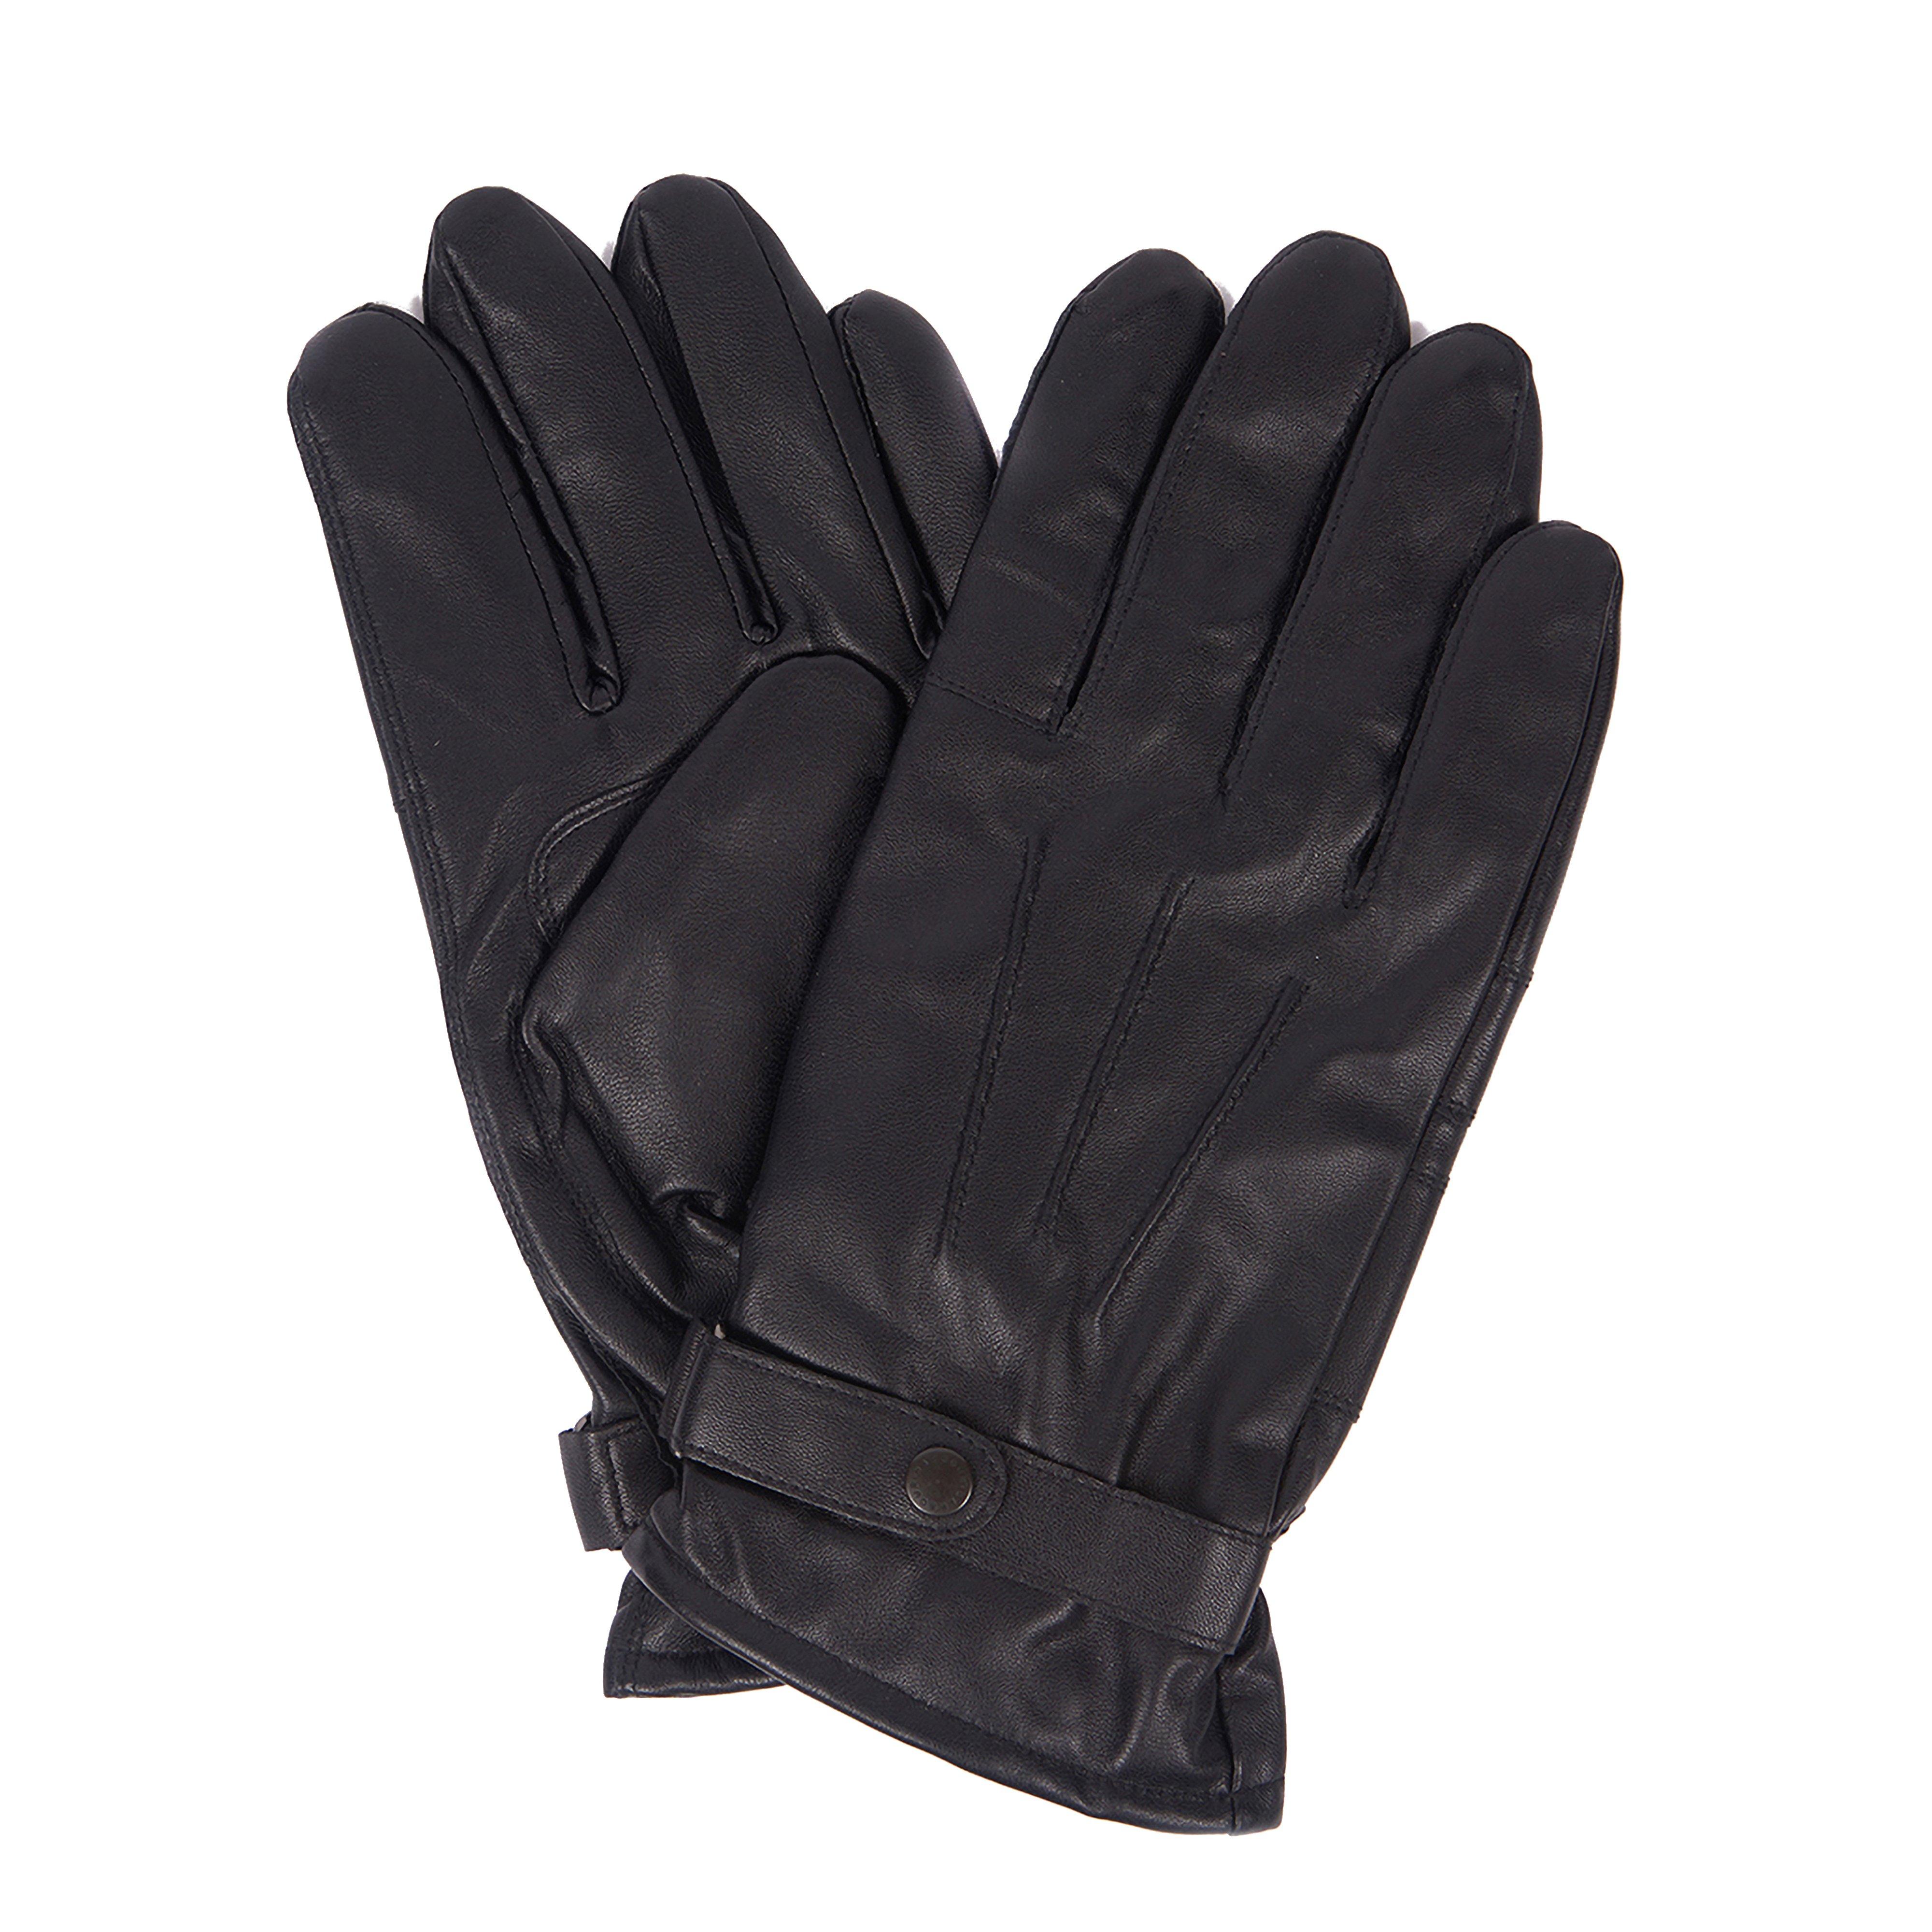 Adults Insulated Burnished Leather Gloves Black